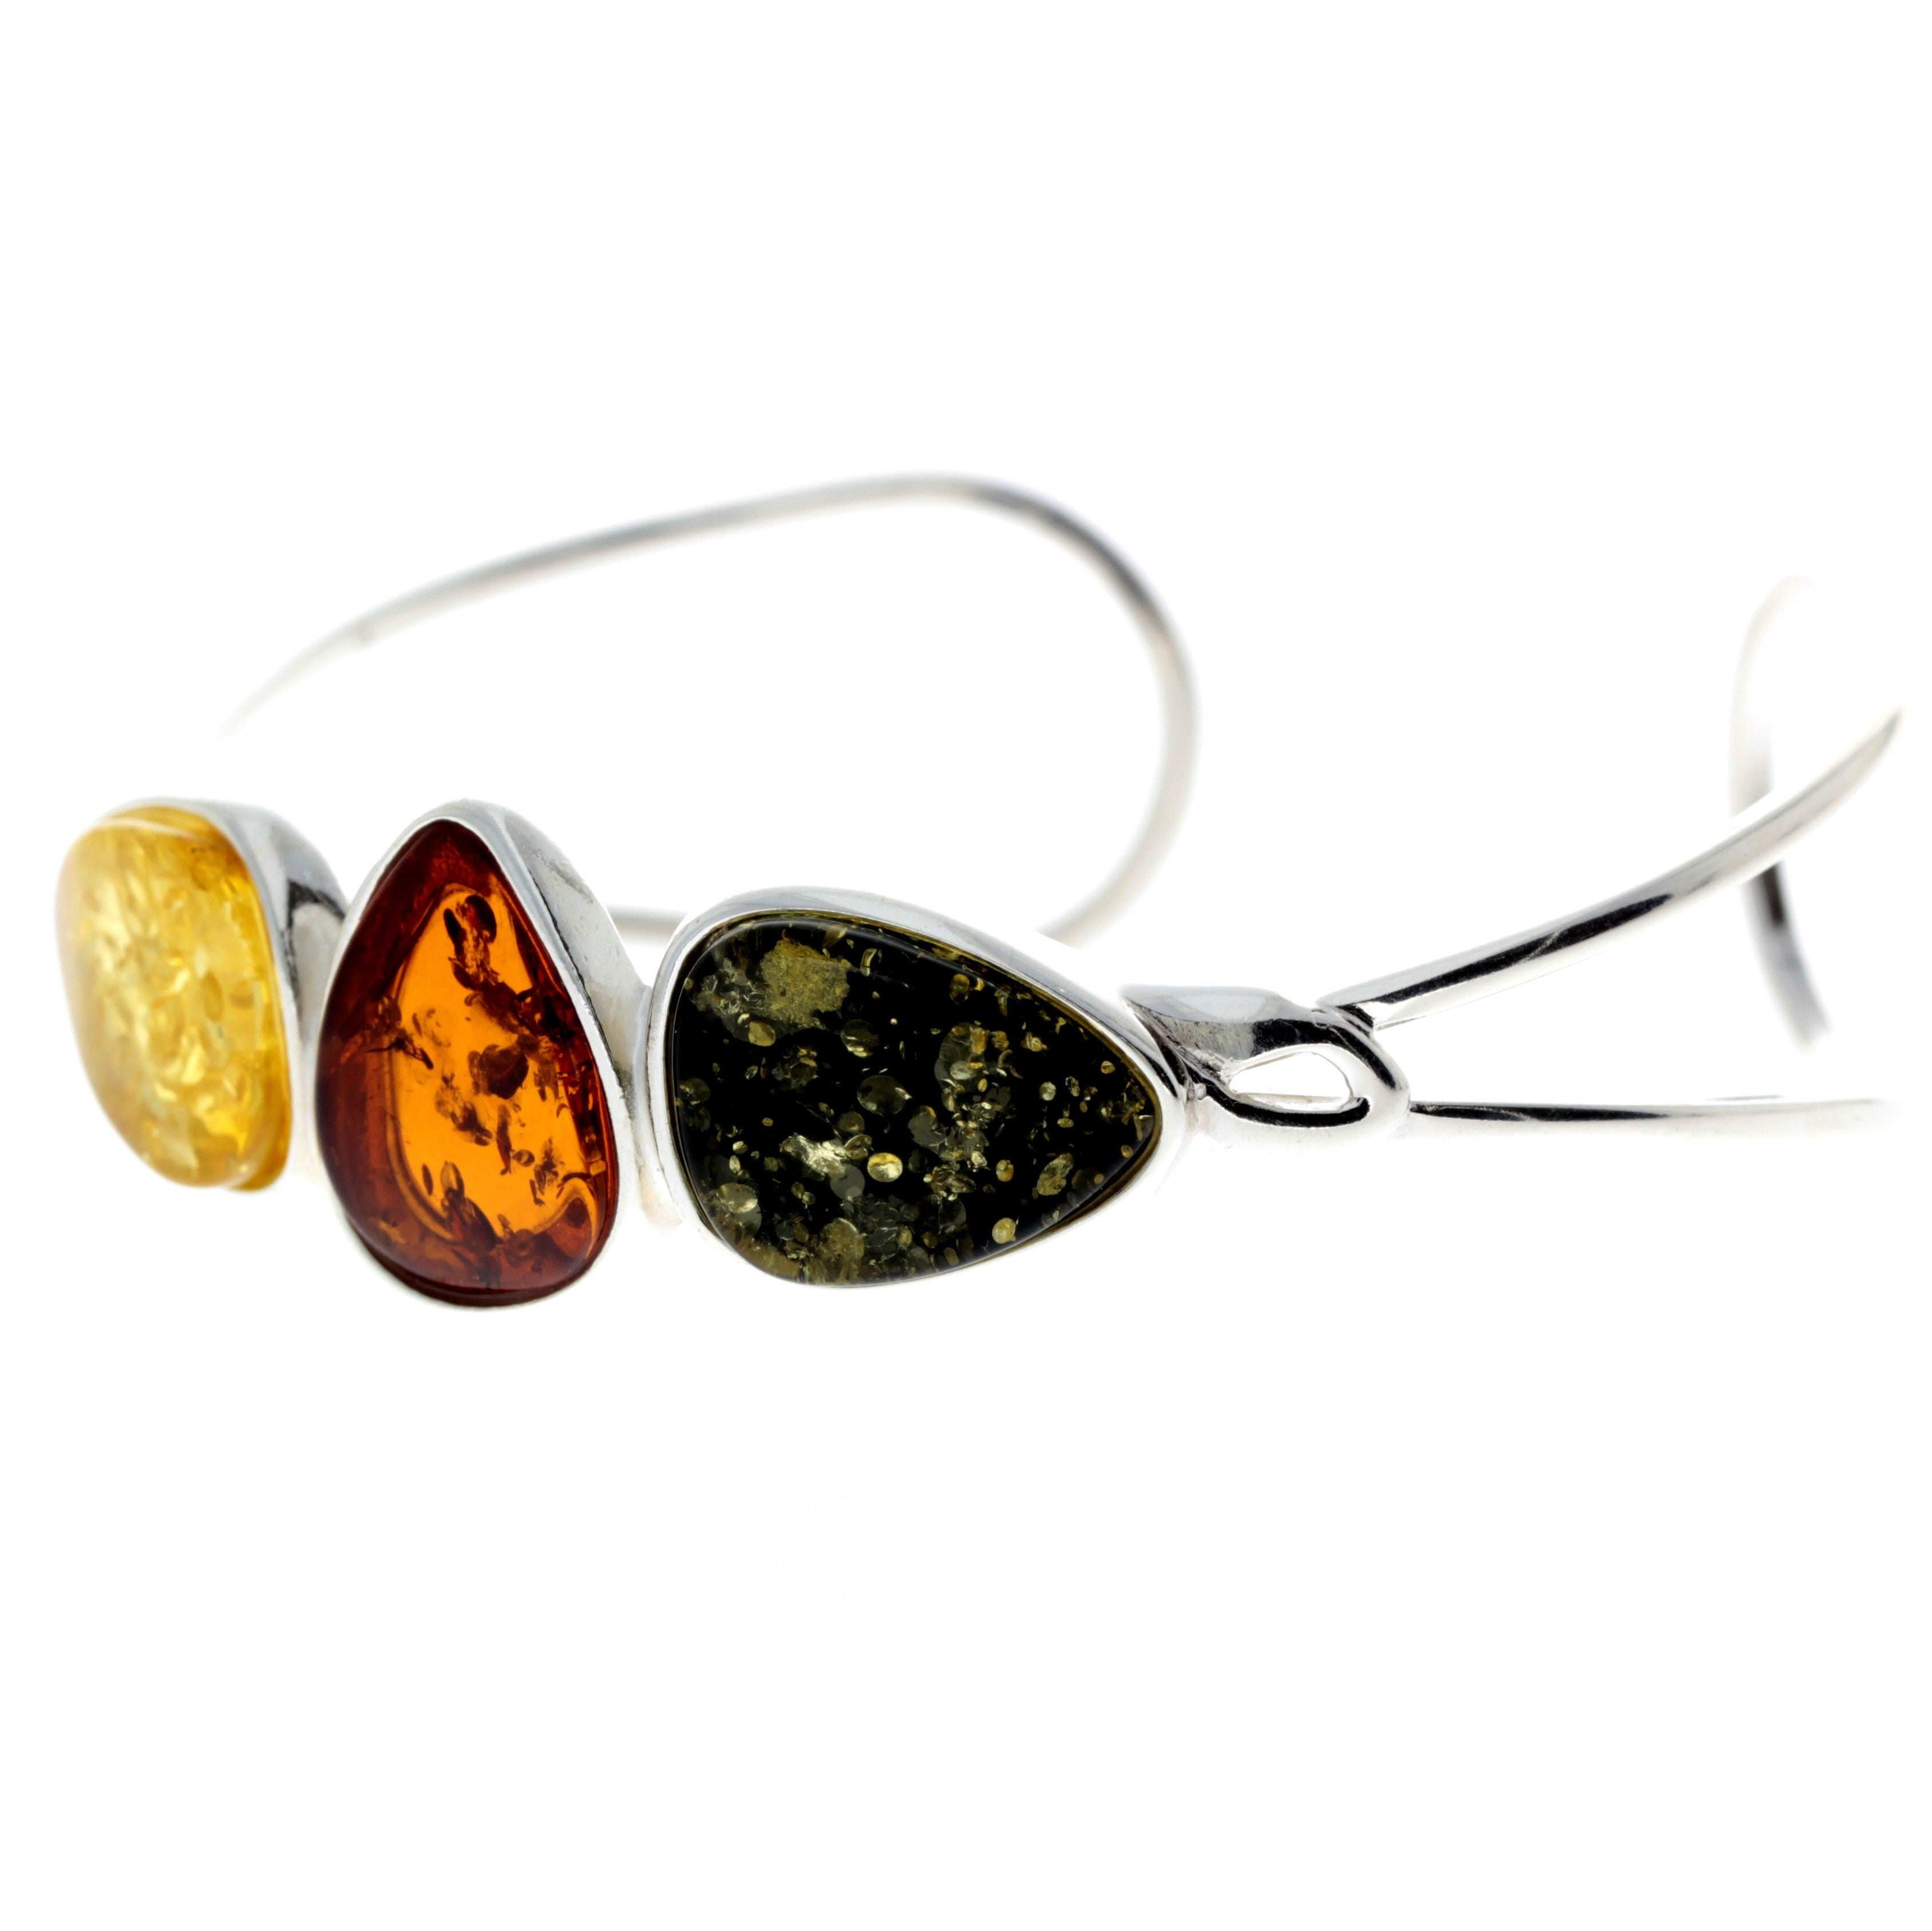 Beautiful Designer Silver Bangle with 3 Baltic Amber Cabochons - GL526